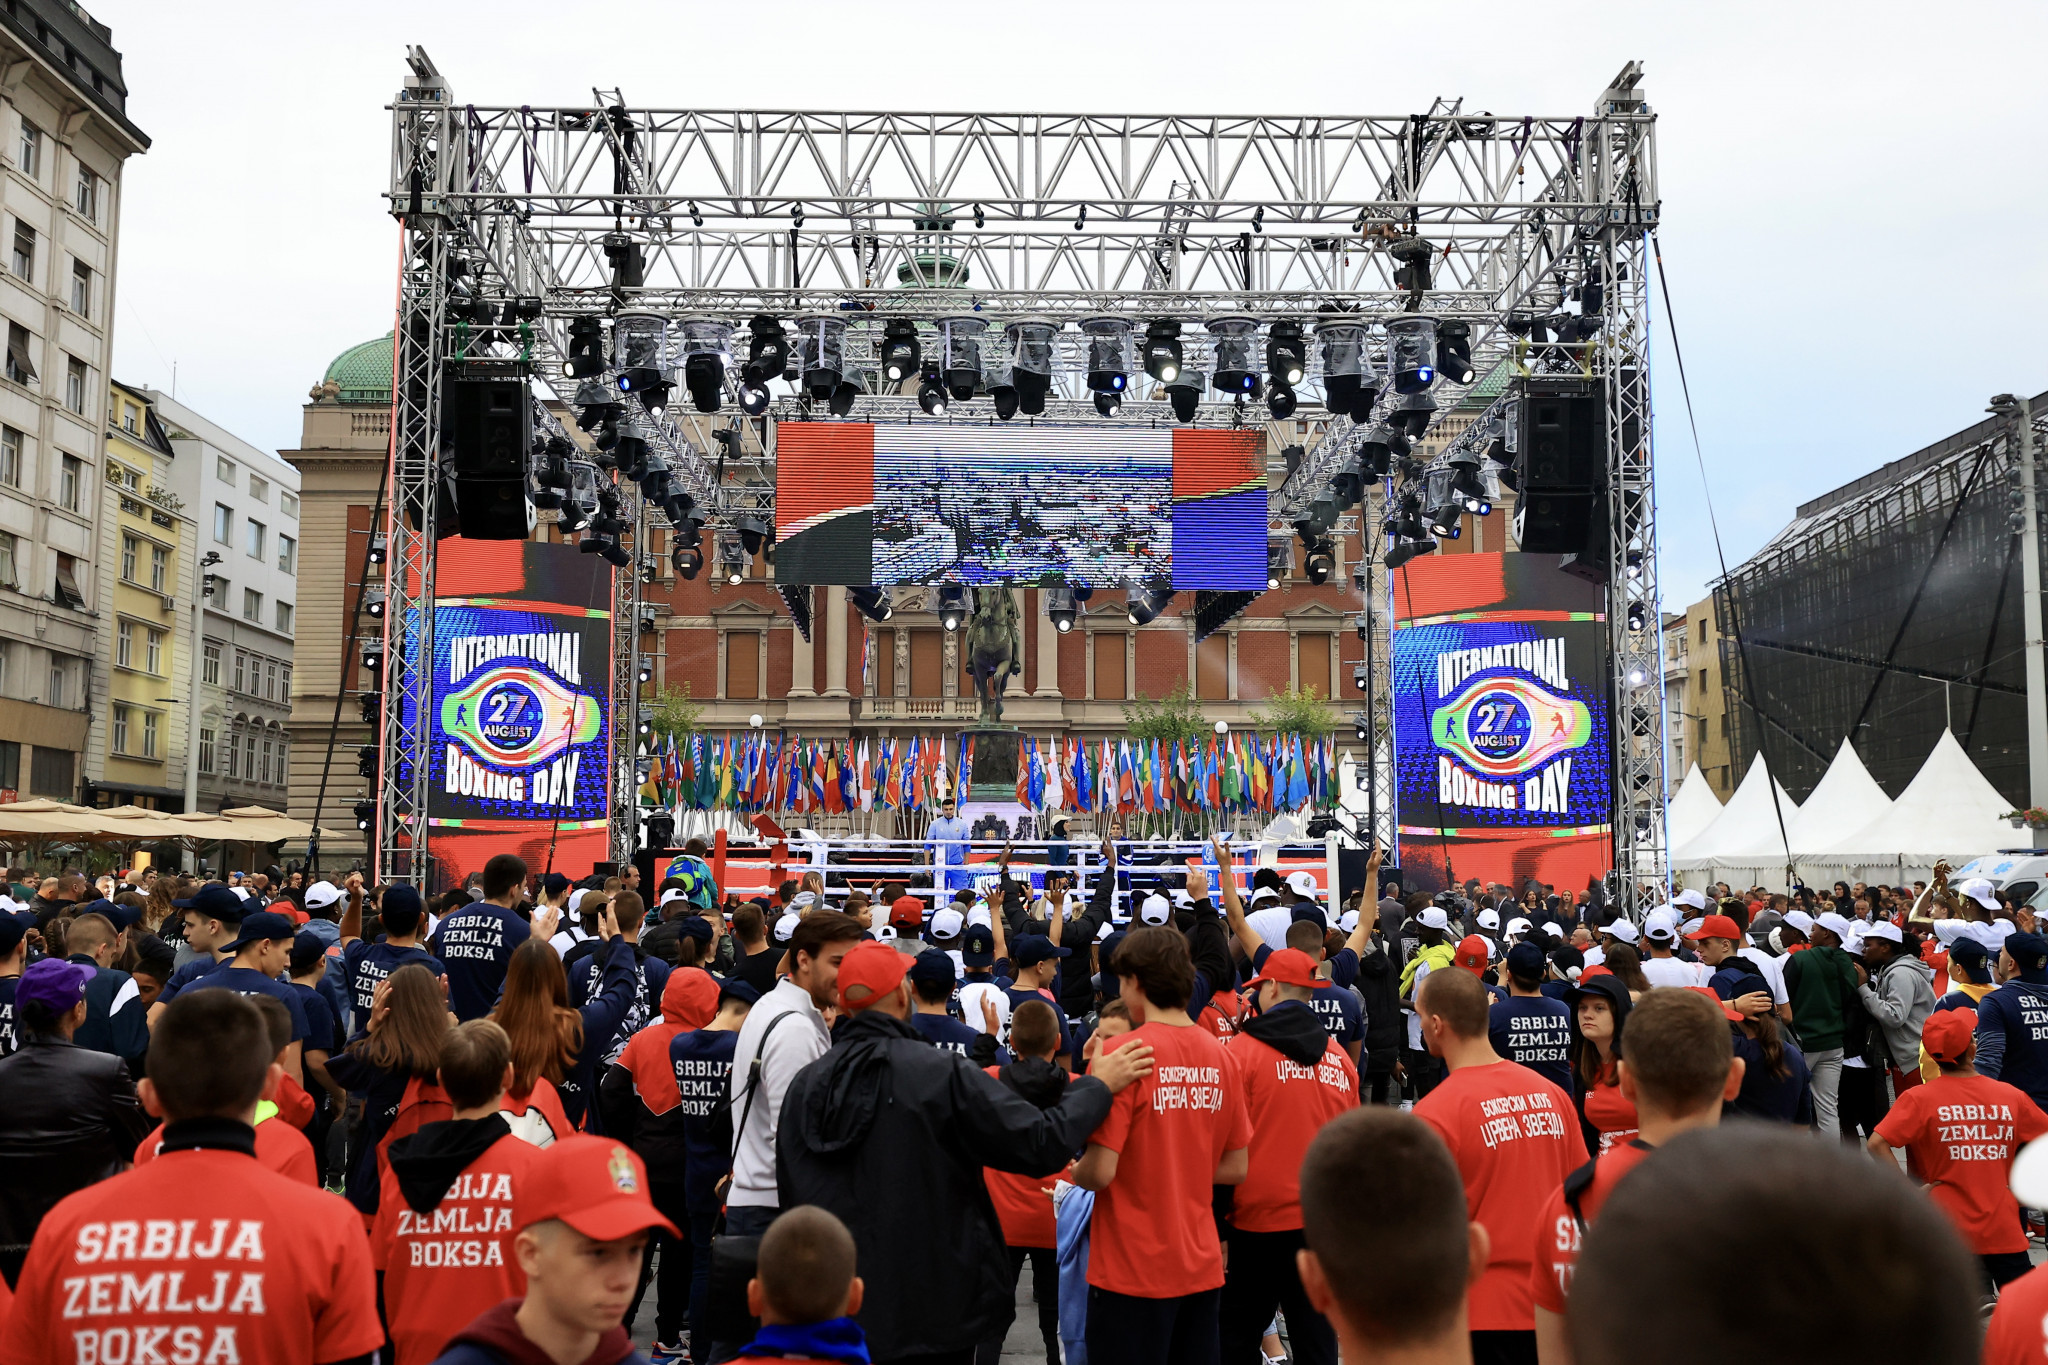 International Boxing Day was celebrated for the first time in Belgrade but will be held in a different city each year ©AIBA